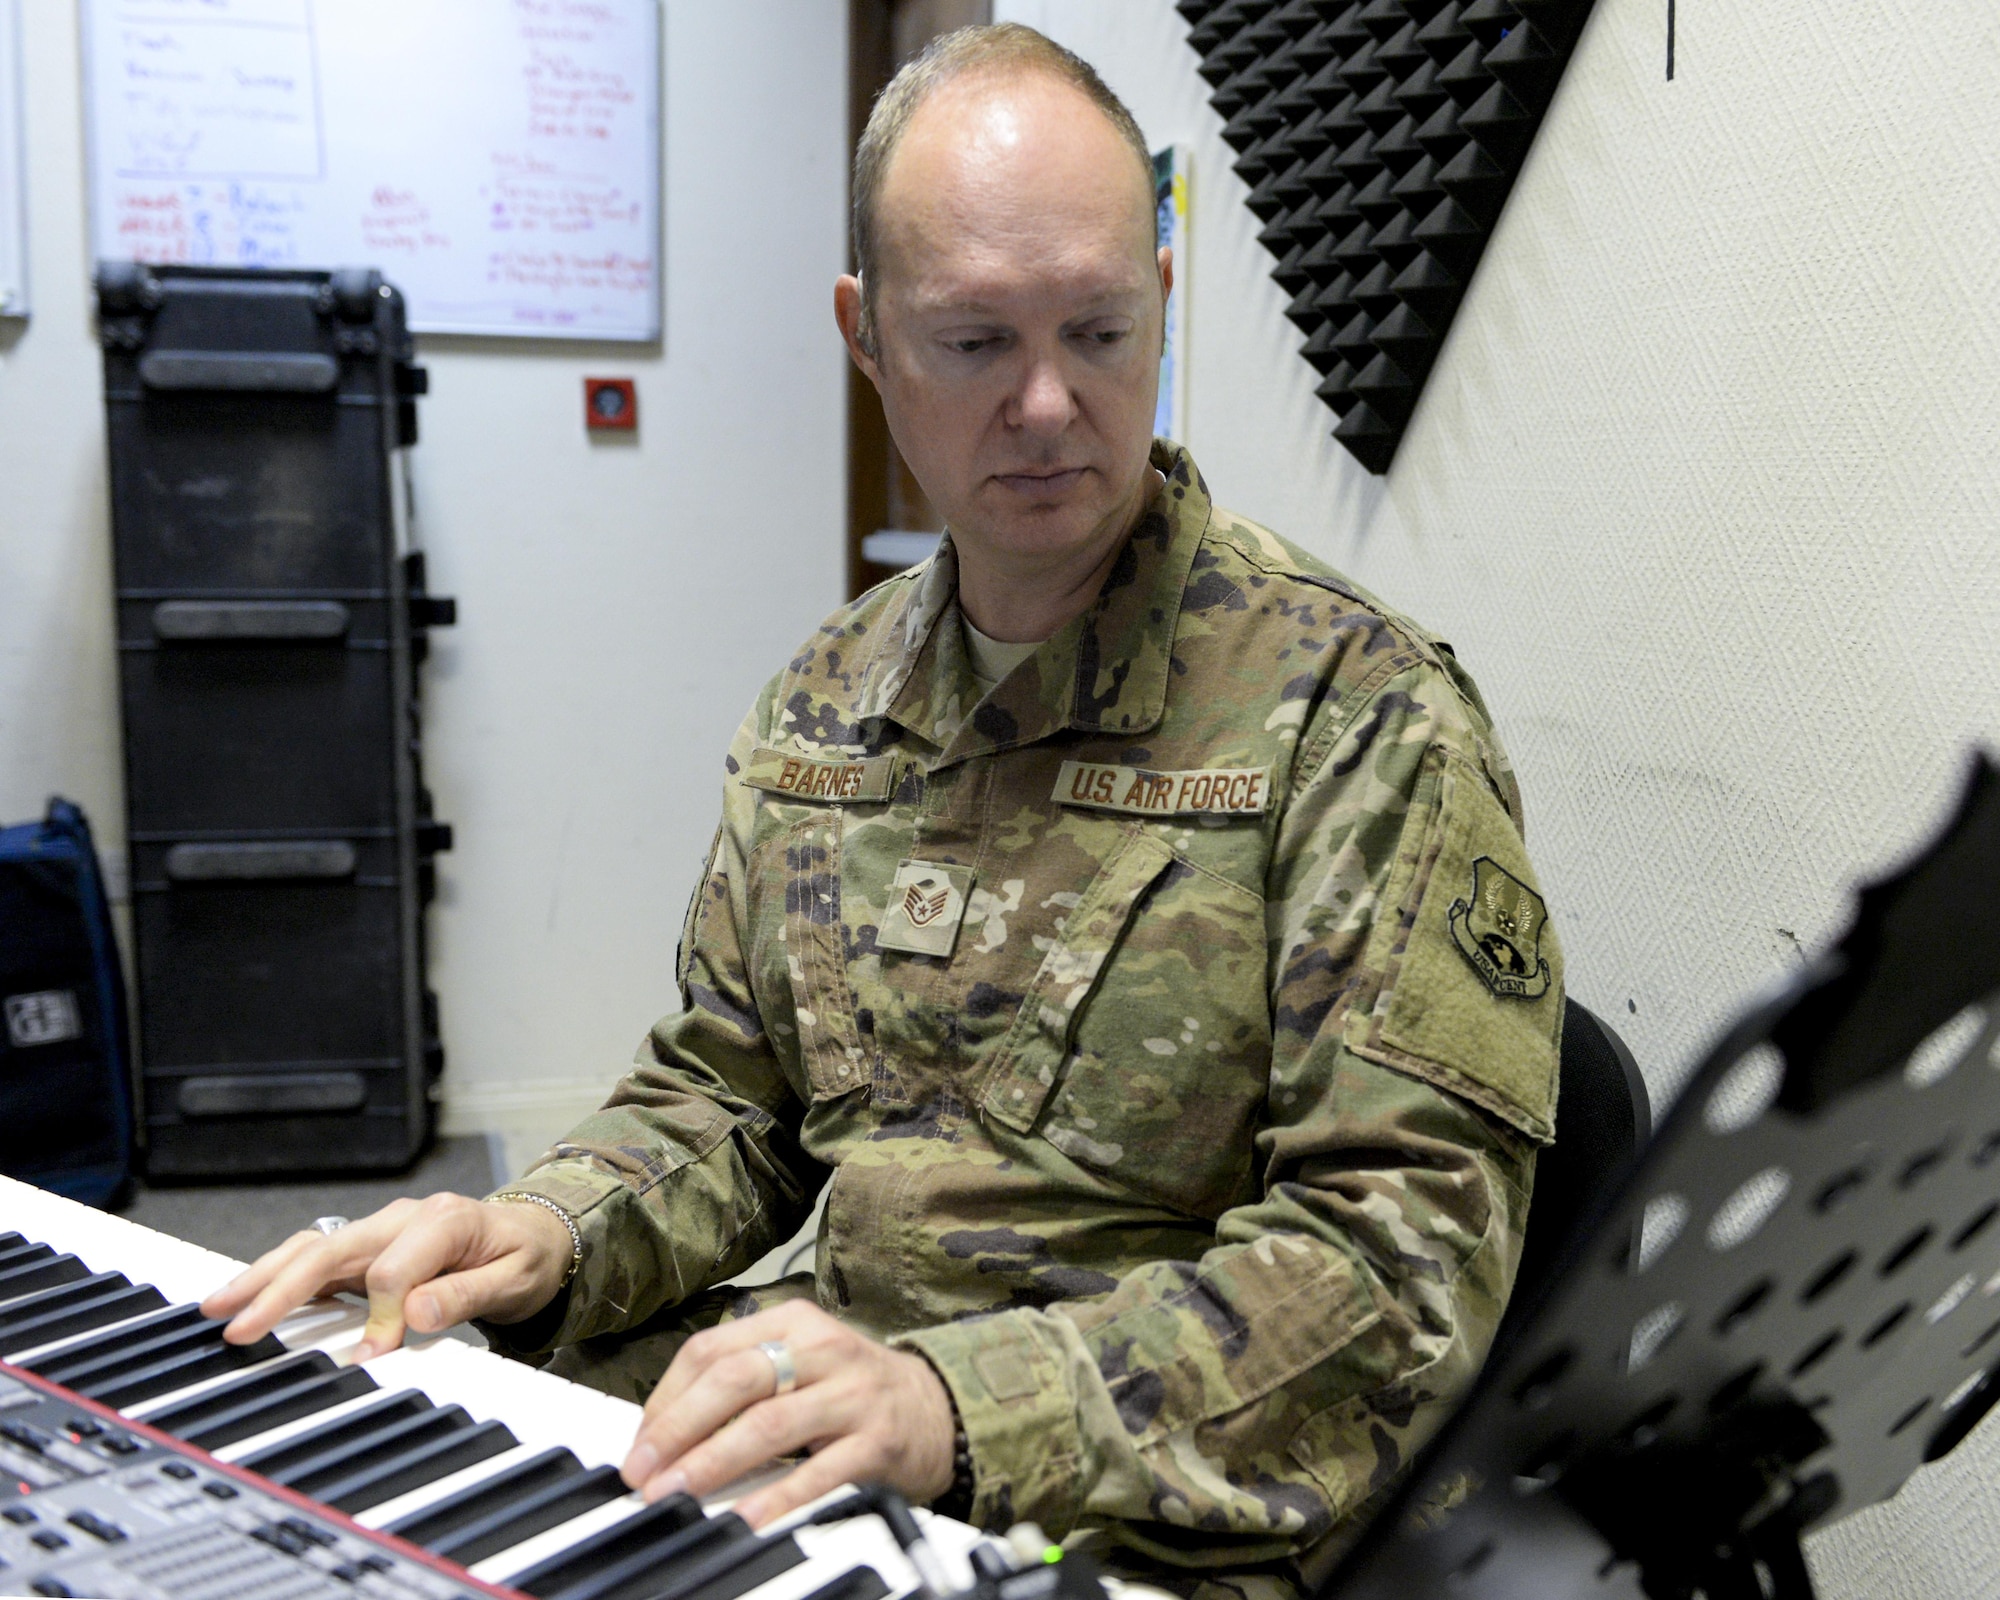 U.S. Air Force Staff Sgt. Robert Barnes, keyboardist assigned to the Air Force Central Command Band, Touch-n-Go, plays keyboard during a recording session as the band recorded their punk rock rendition of the Air Force Song at Al Udeid, Air Force Base, Qatar, Sept. 21, 2017.